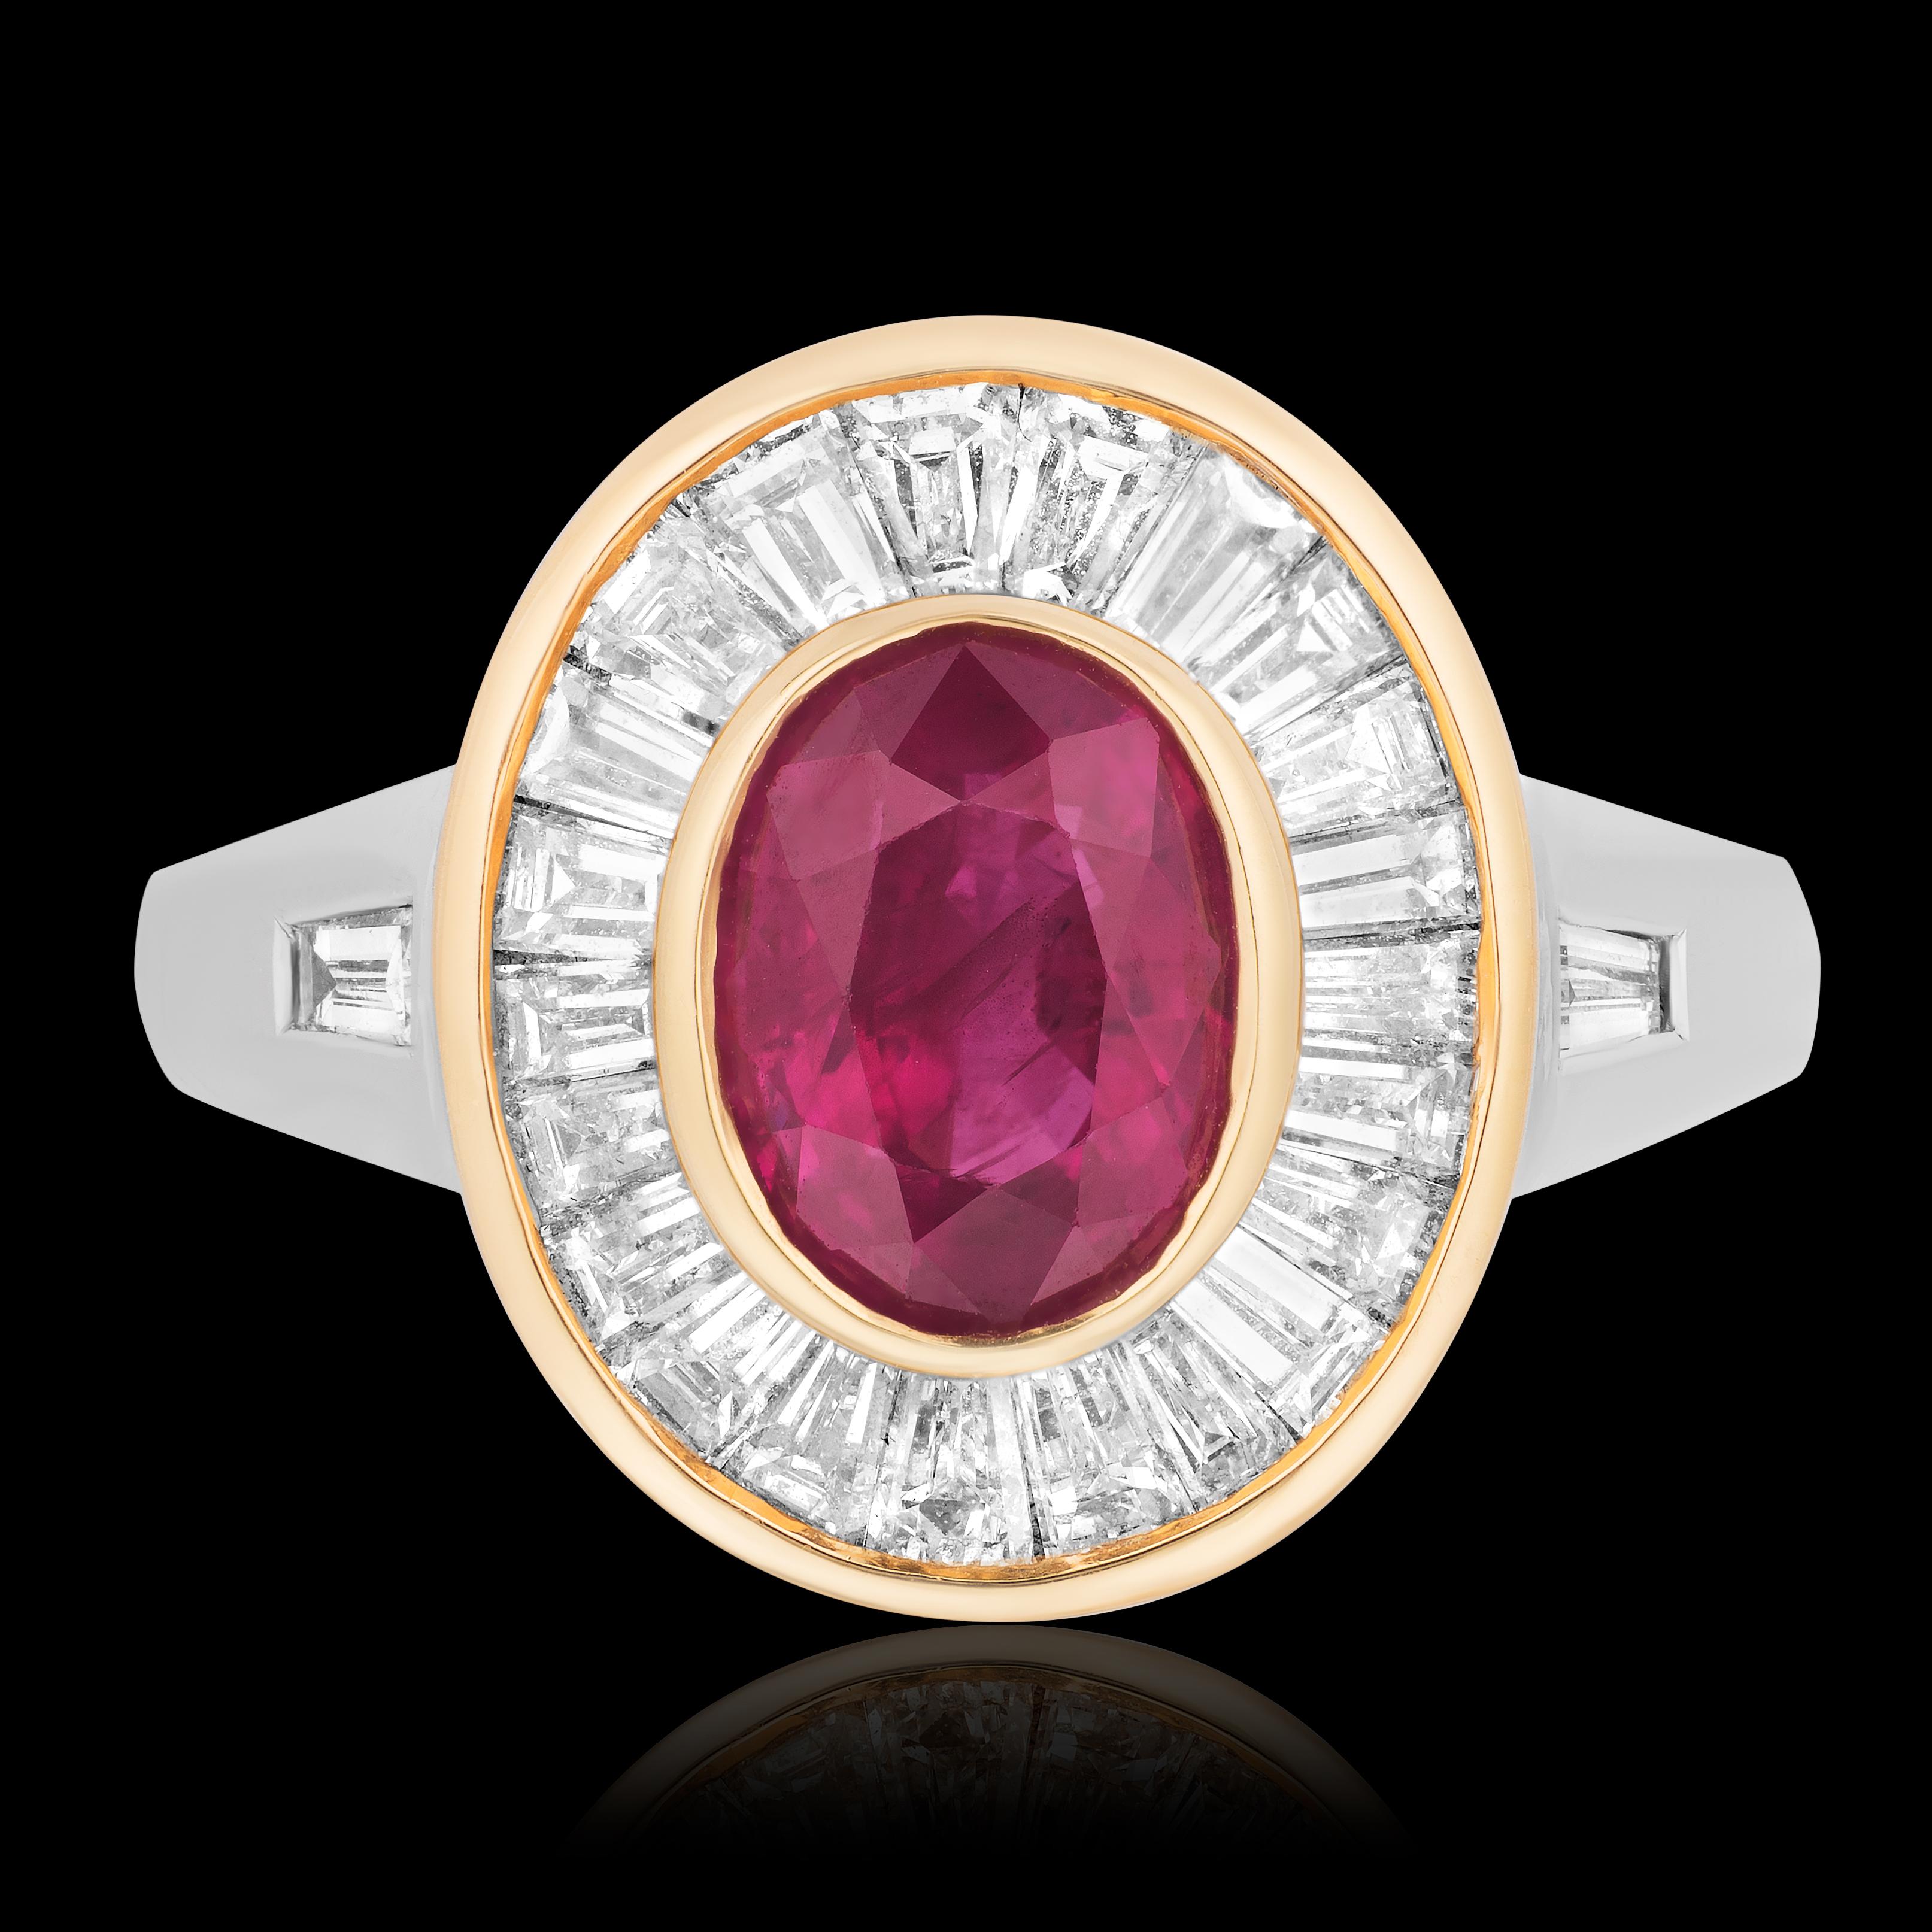 Oval Cut Burma Ruby Diamond Ring 18k White & Rose Gold Andreoli Certified For Sale